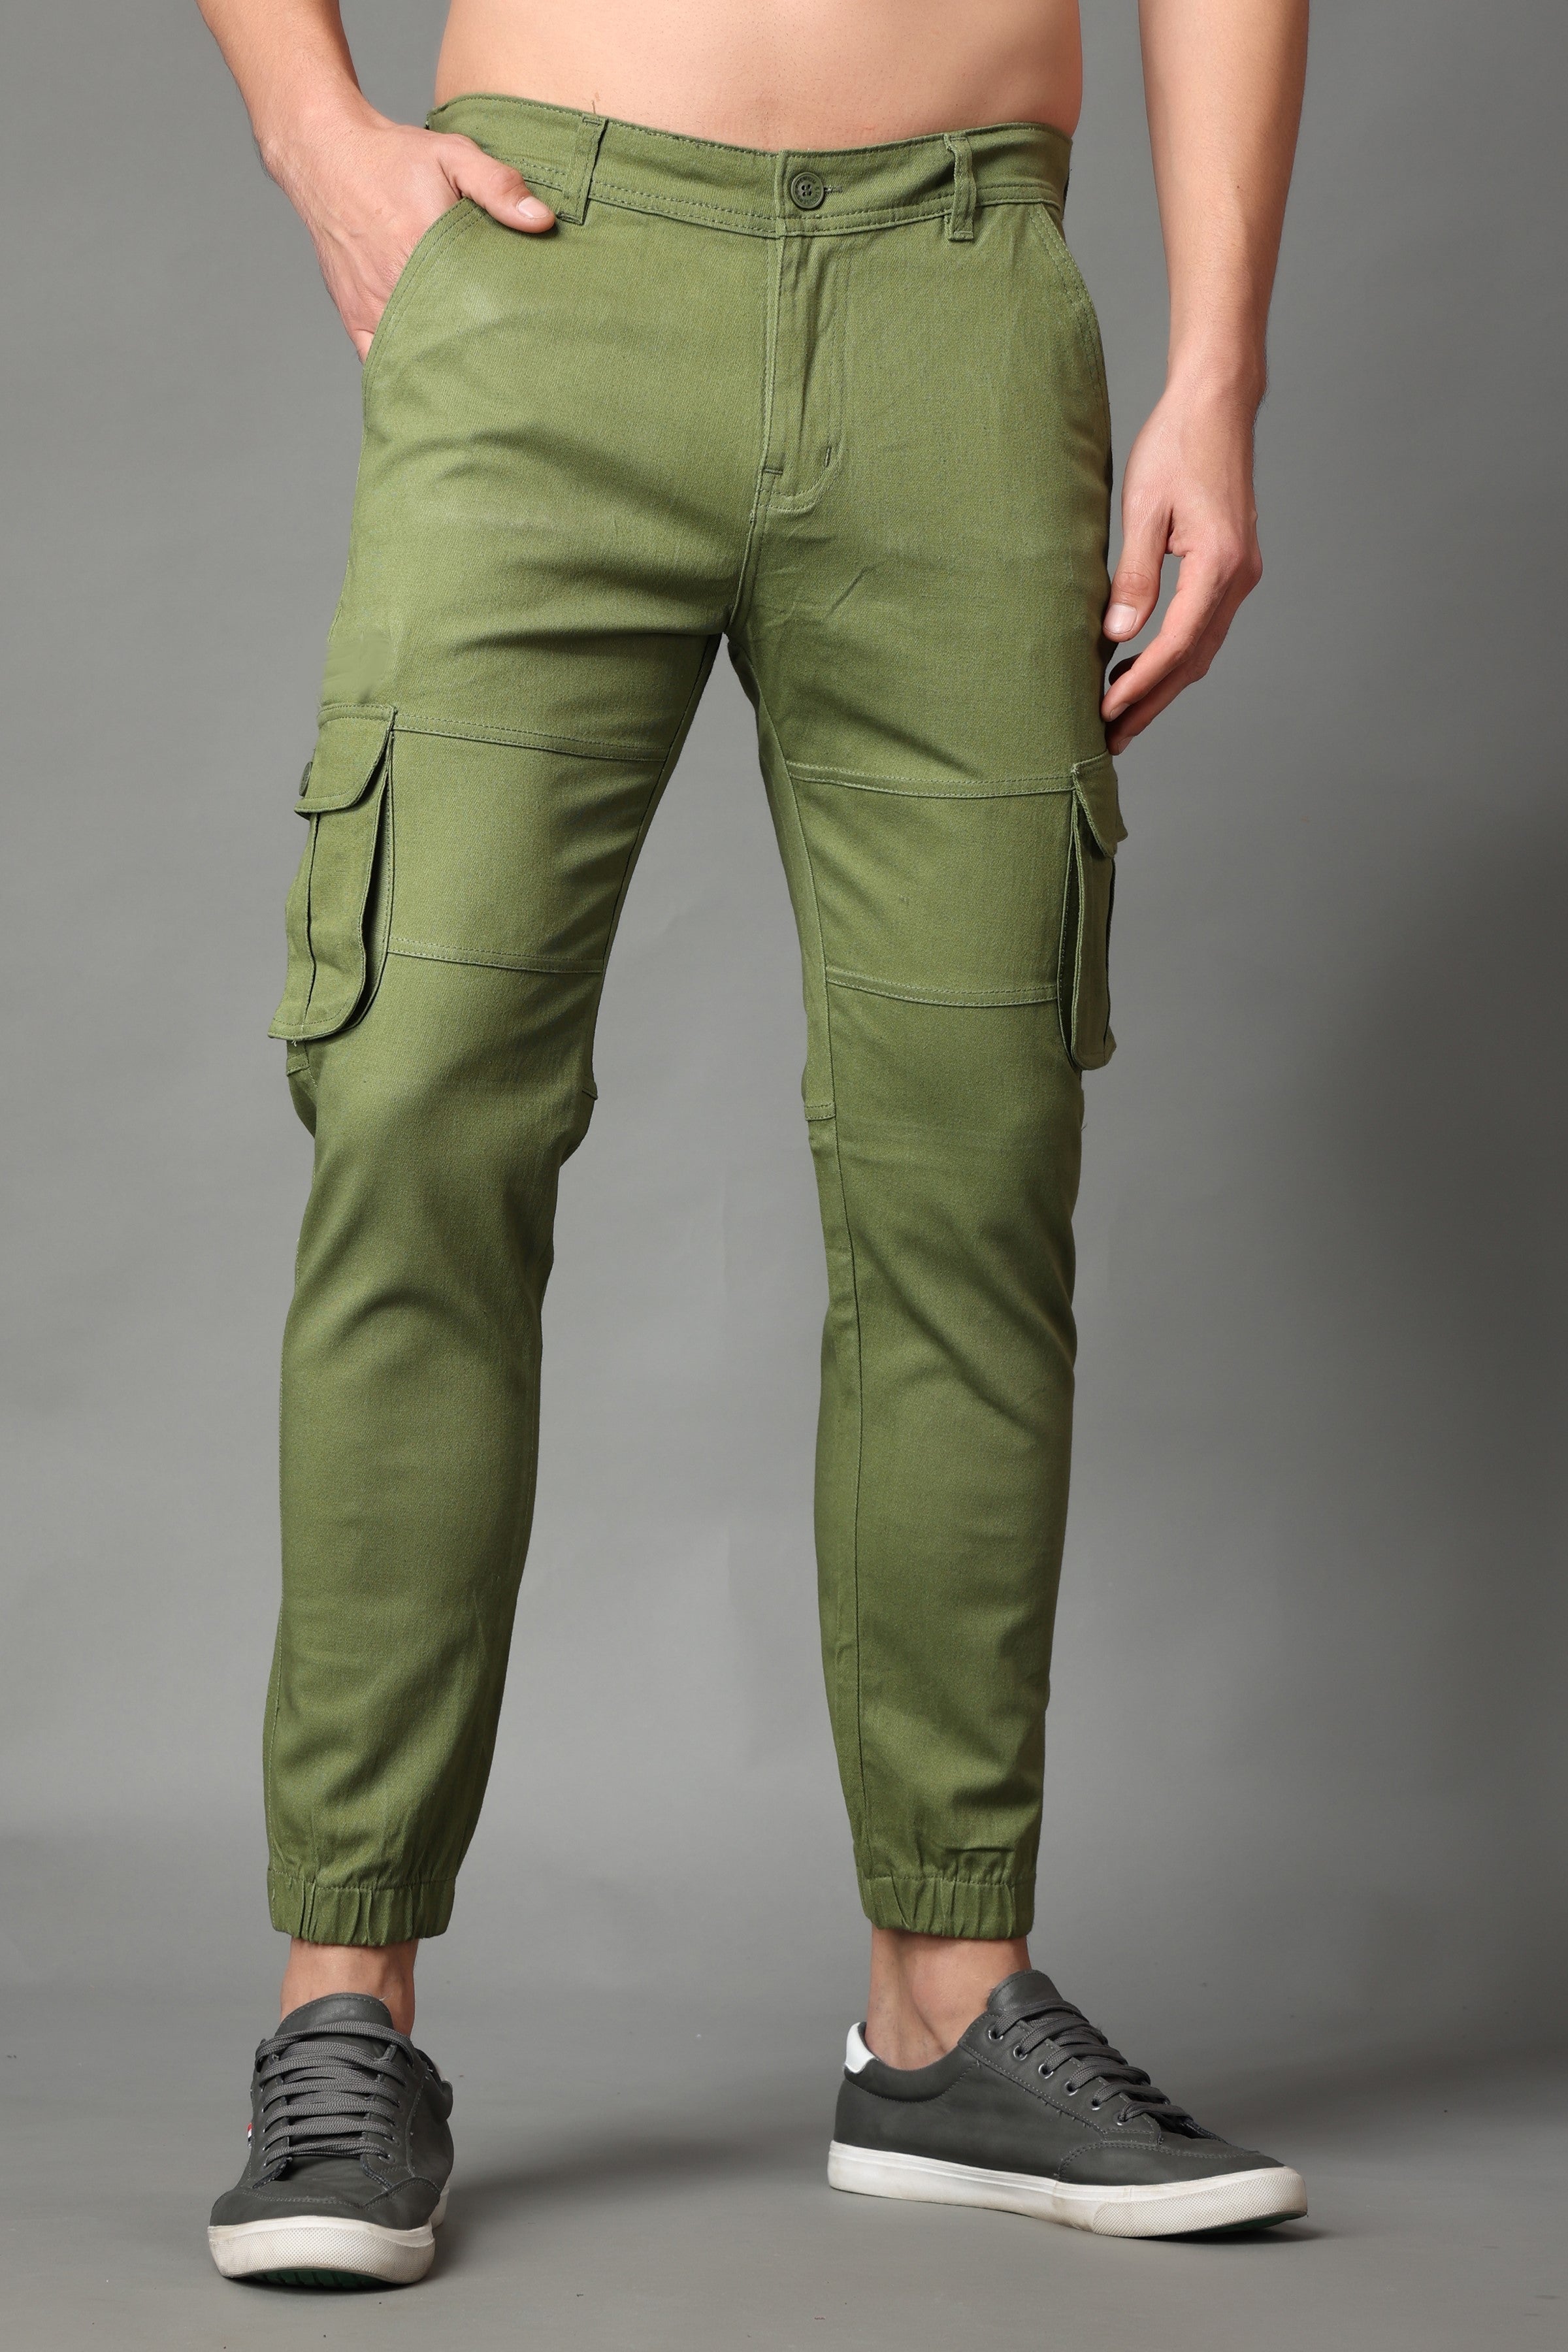 New Look pull on smart trousers in dark green | ASOS